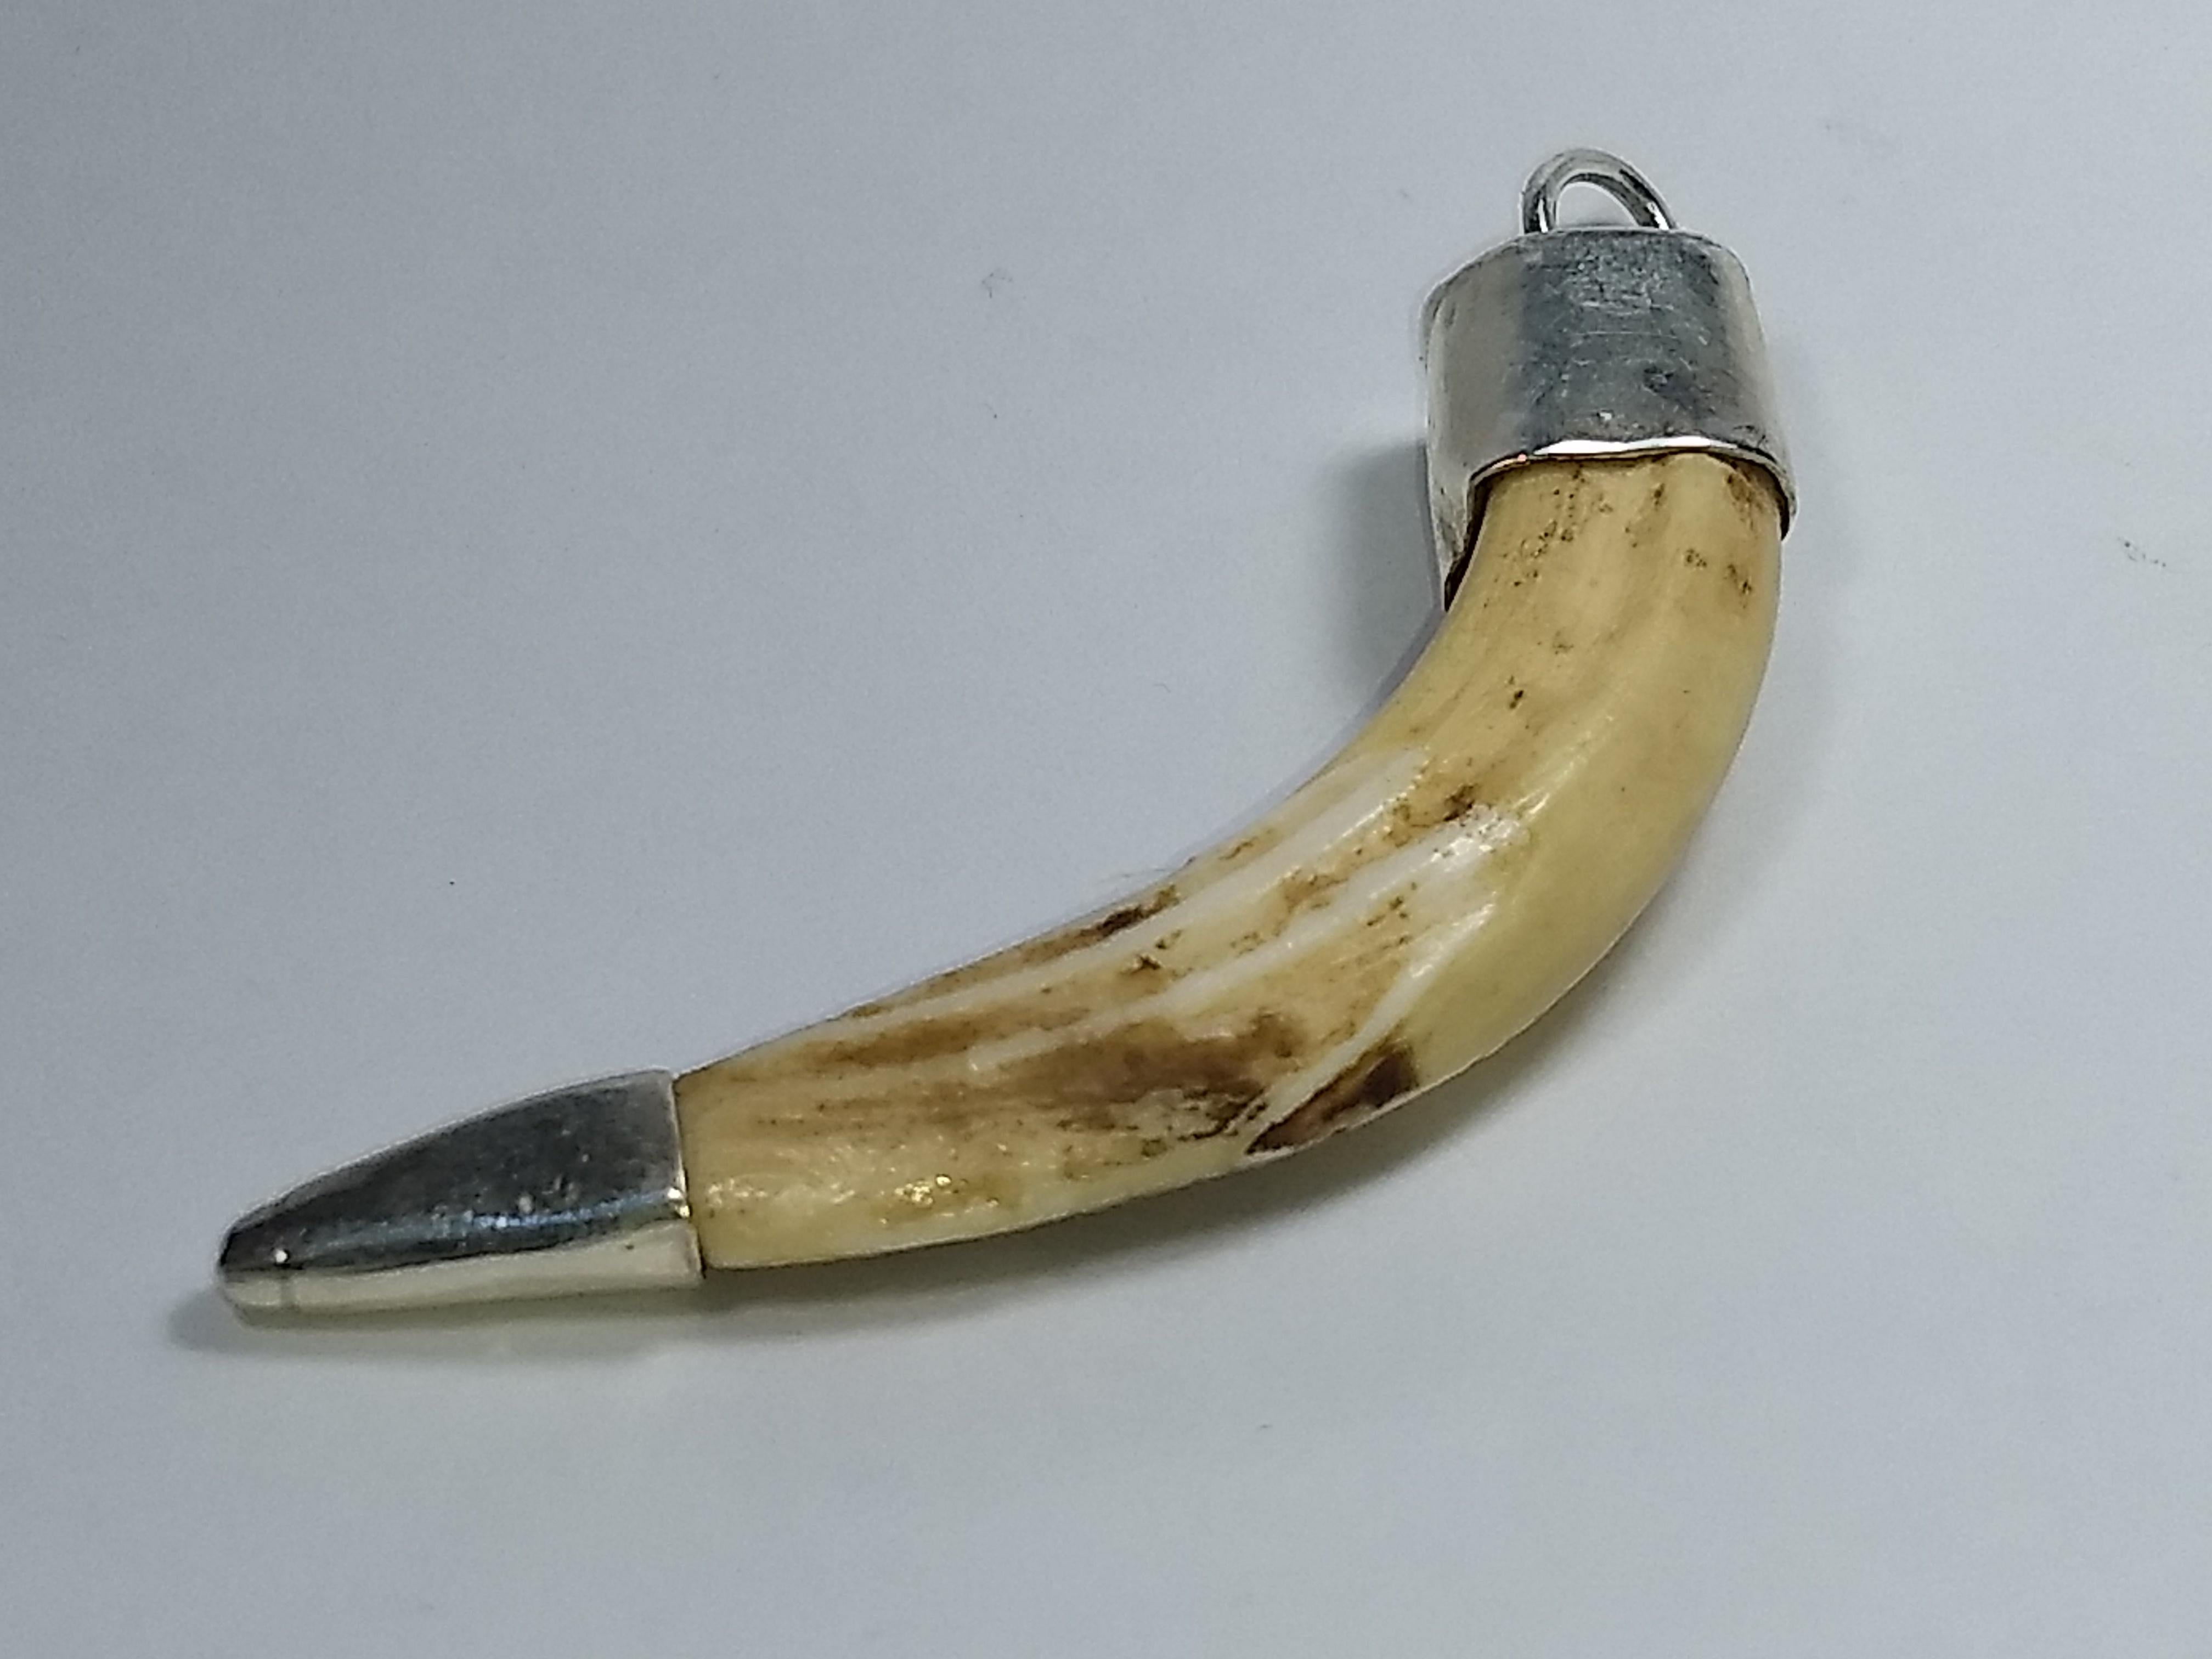 This Alberto Juan one of a kind pendant was made from one wild boar tusk and sterling silver, unmarked. This pendant measures 2.7